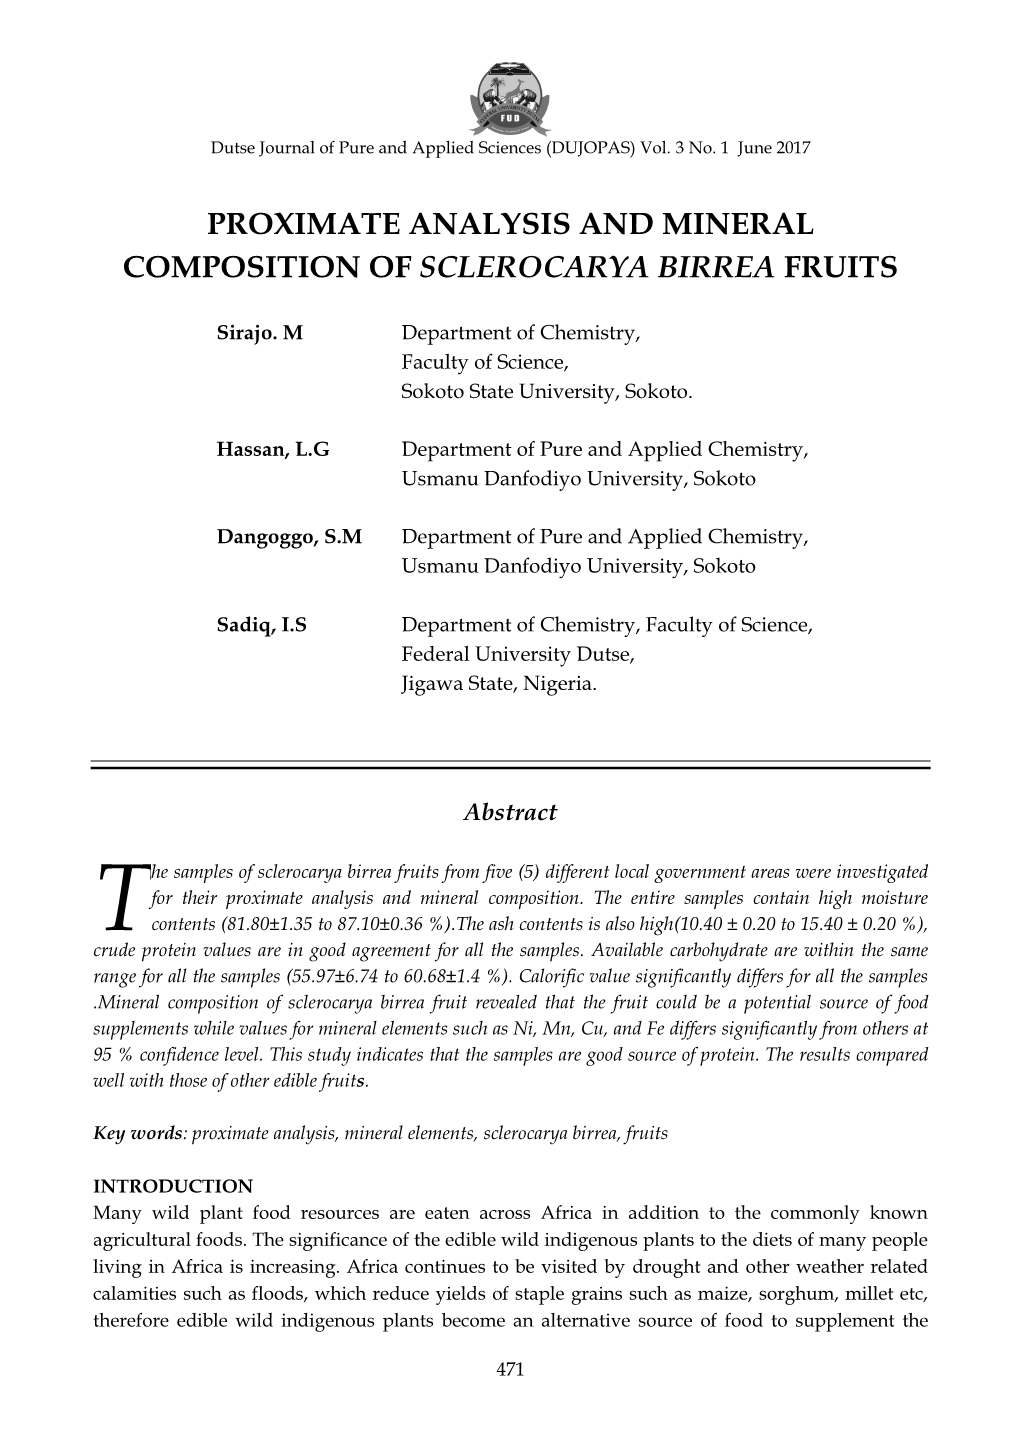 Proximate Analysis and Mineral Composition of Sclerocarya Birrea Fruits